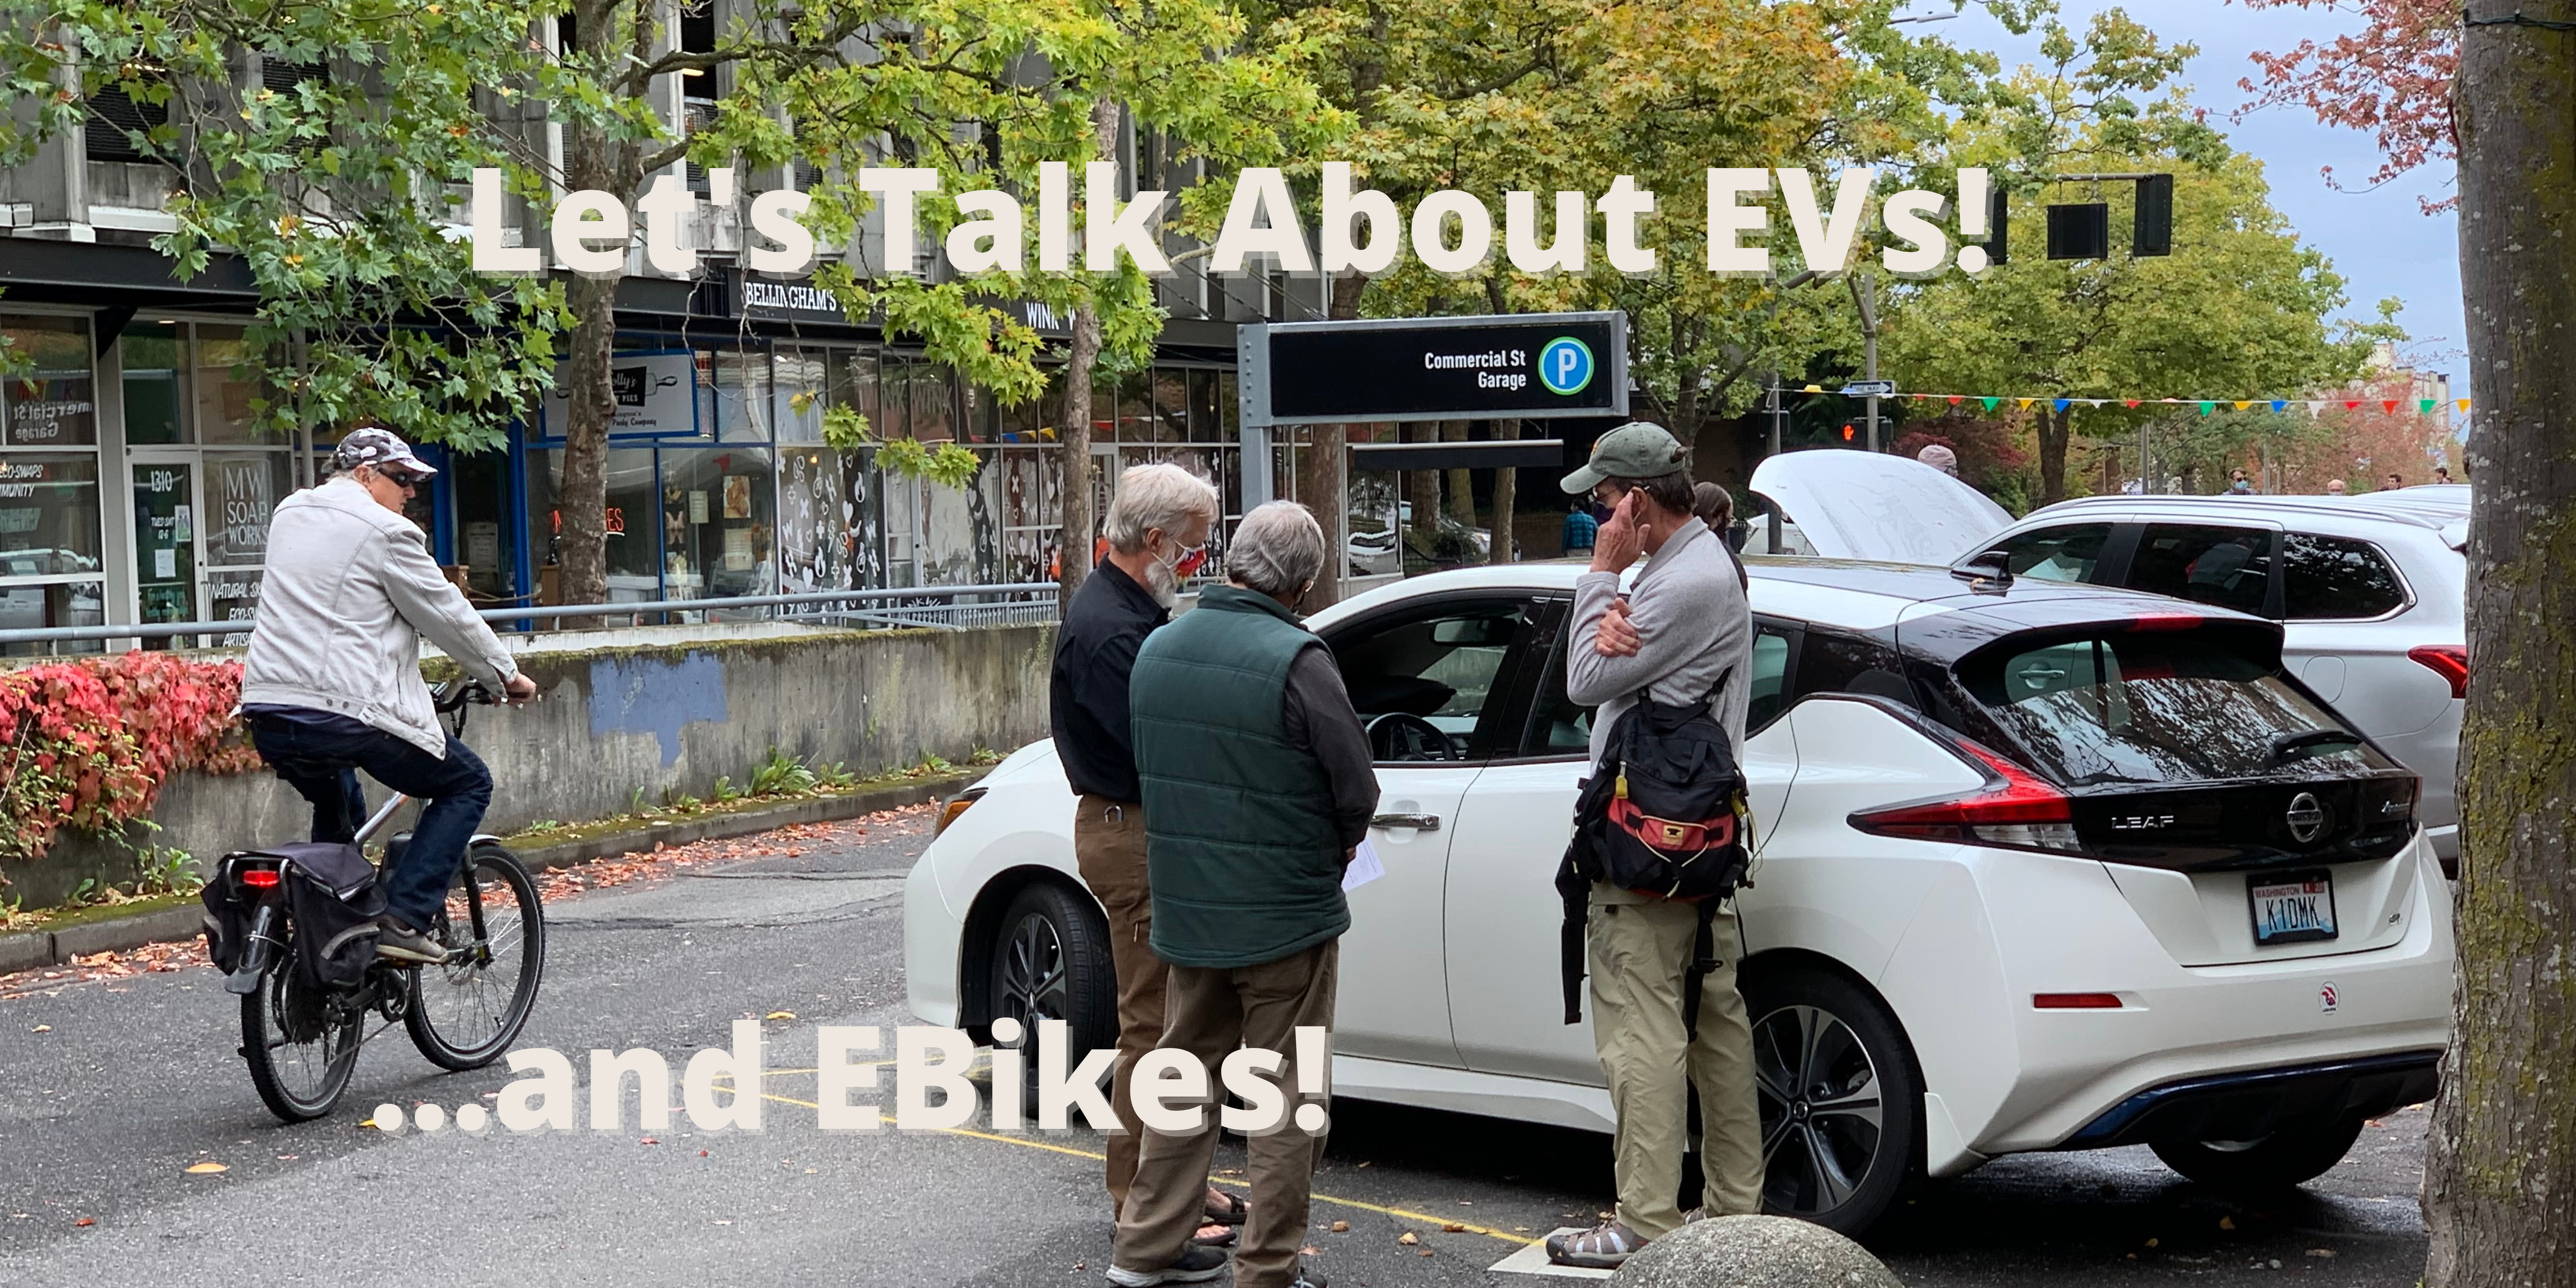 People standing around an electric vehicle talking. Text reads Let's talk about EVs and Ebikes!